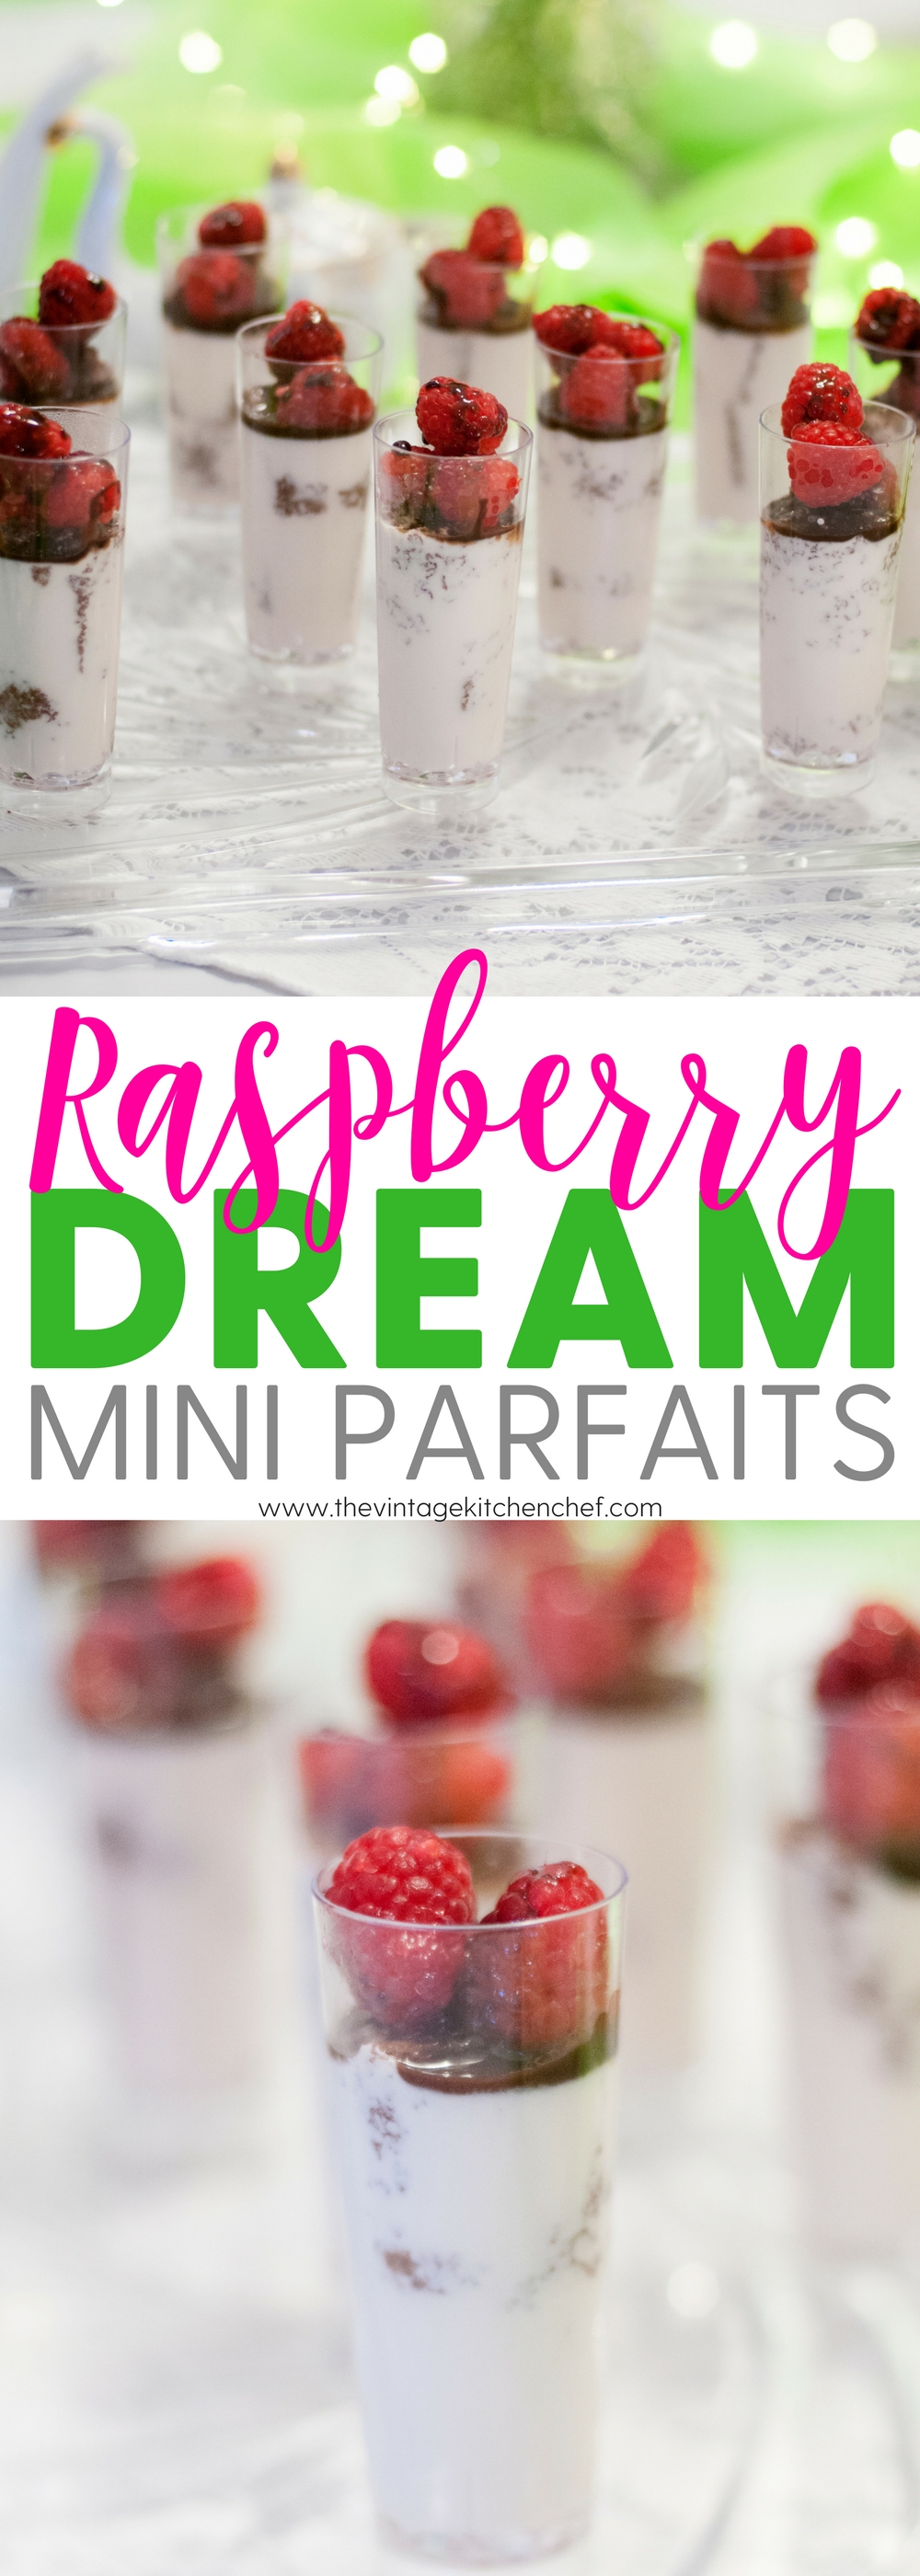 Easy Raspberry Dream Mini Parfaits begin with bites of chocolate cake mingled with creamy Italian custard, fresh raspberries and a touch of chocolate syrup. 